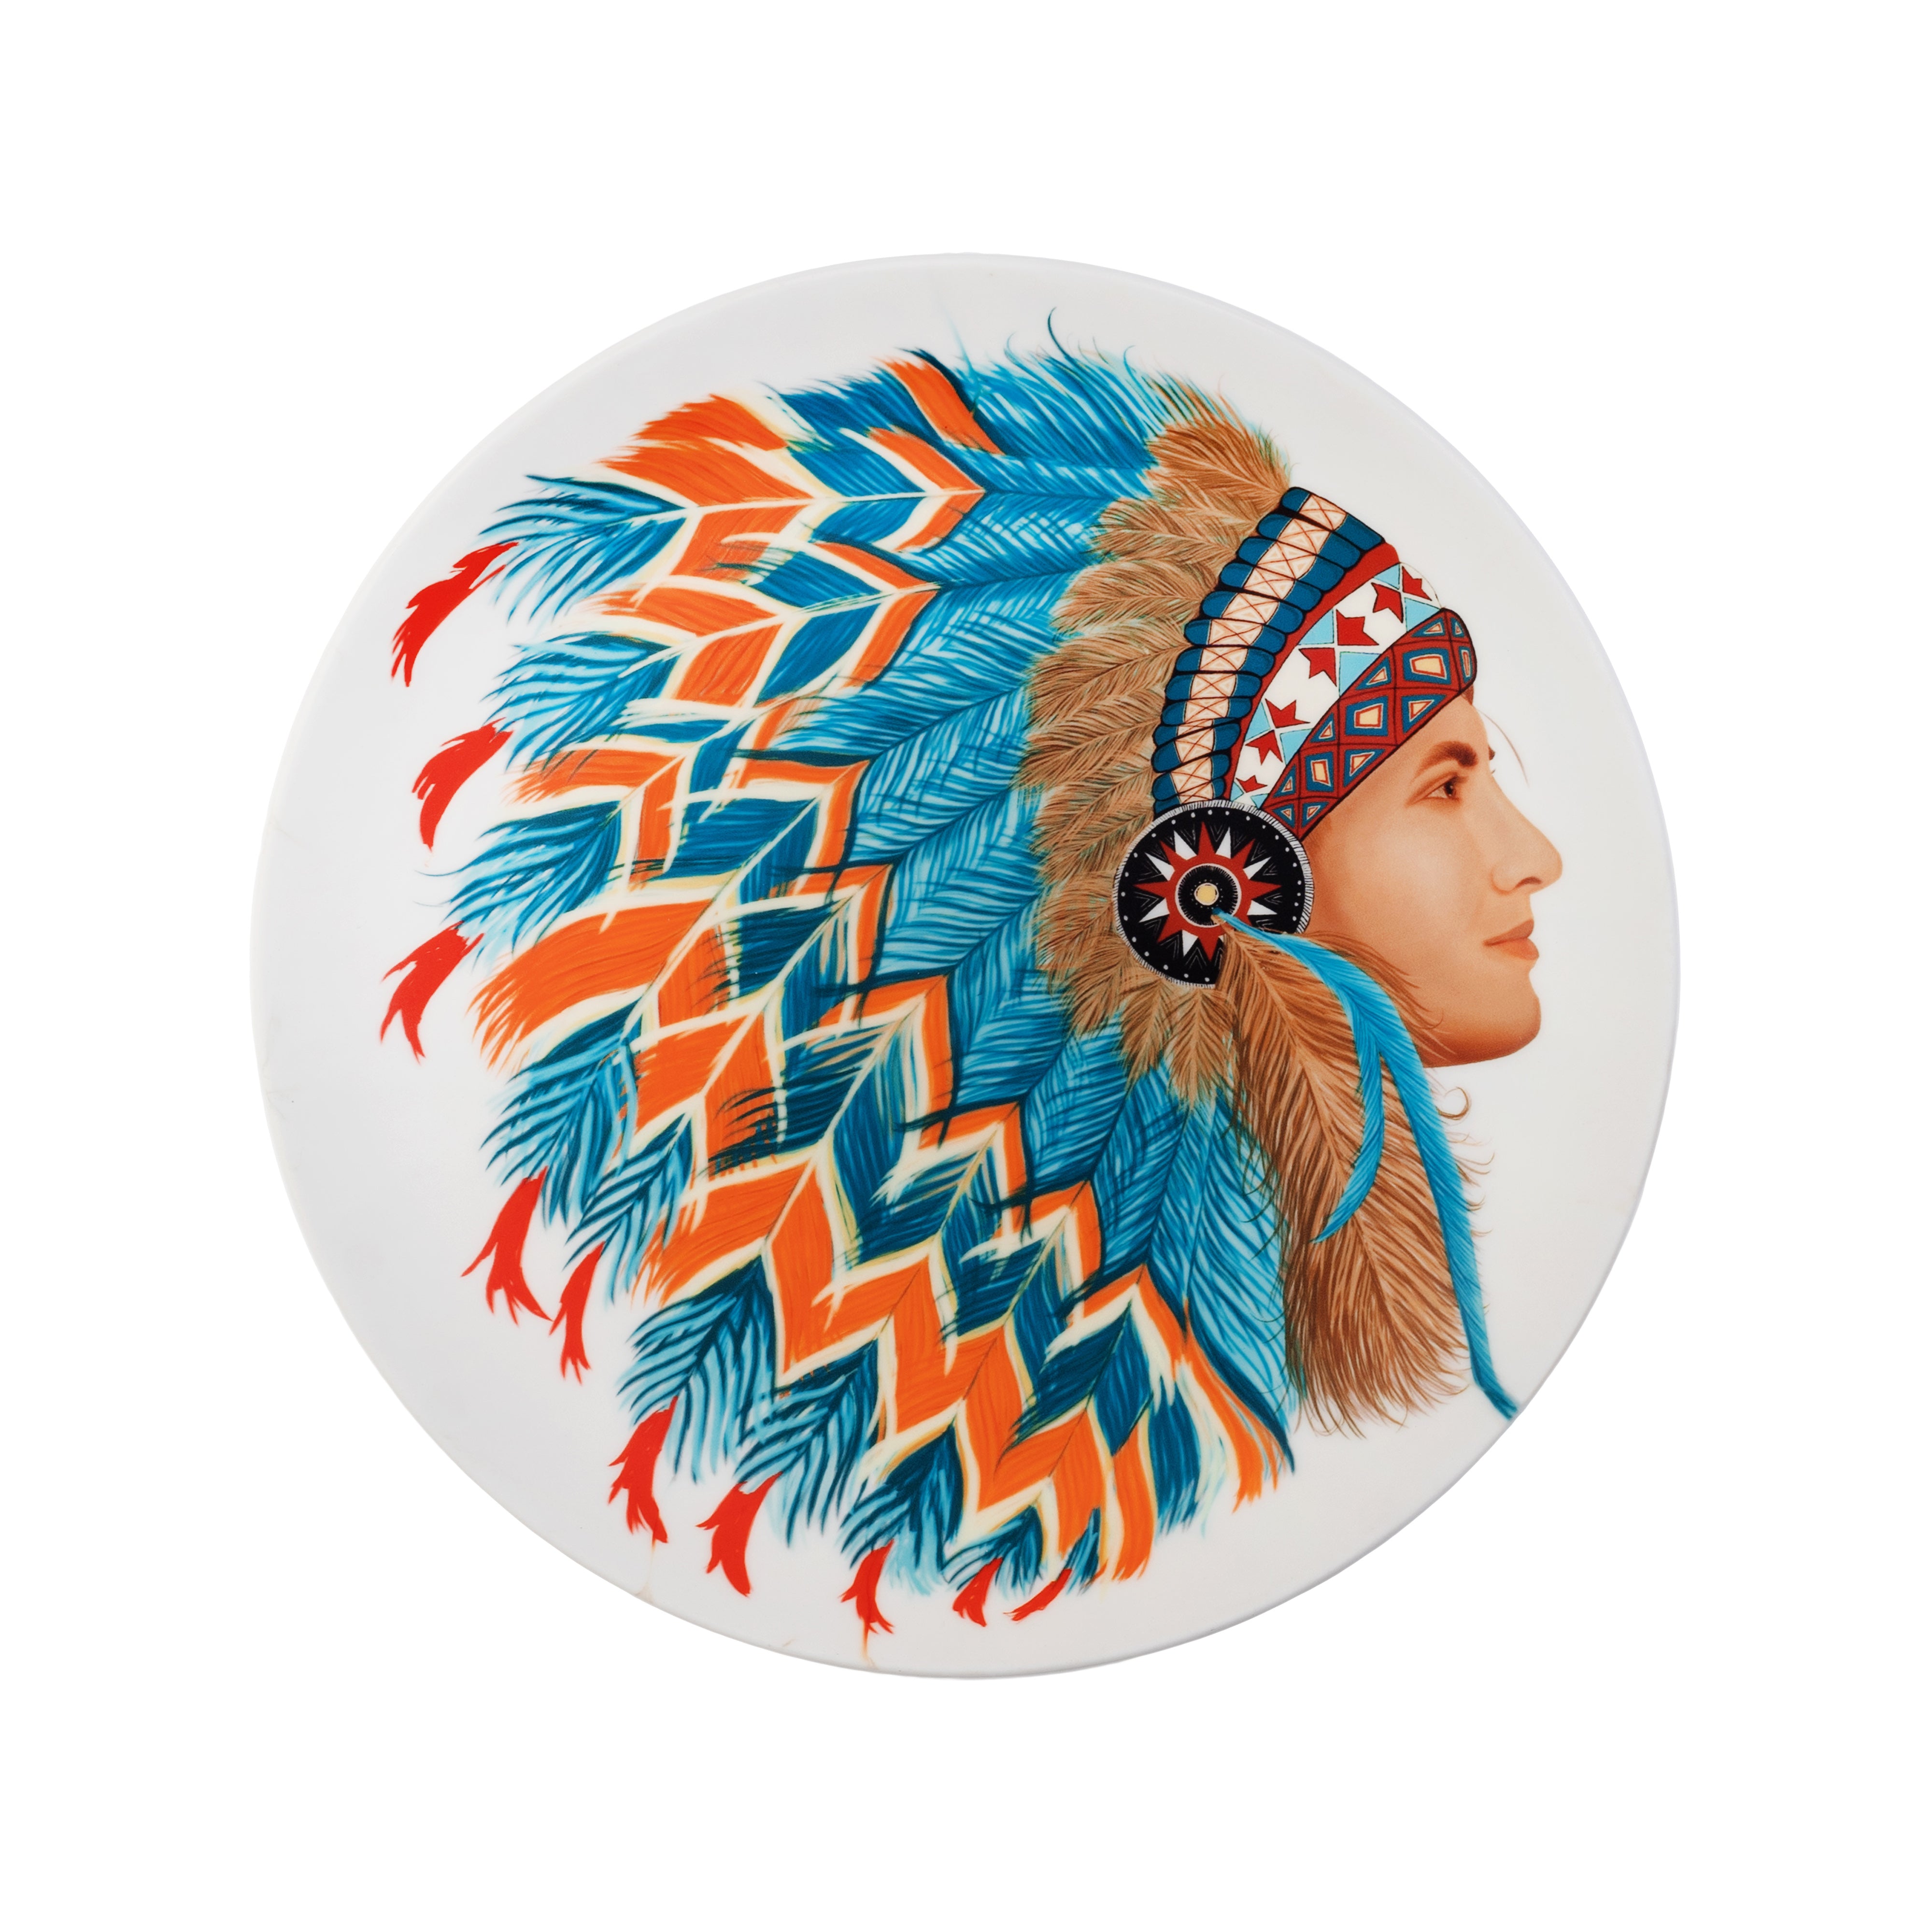 Decorative Wall Plate - Native Americans